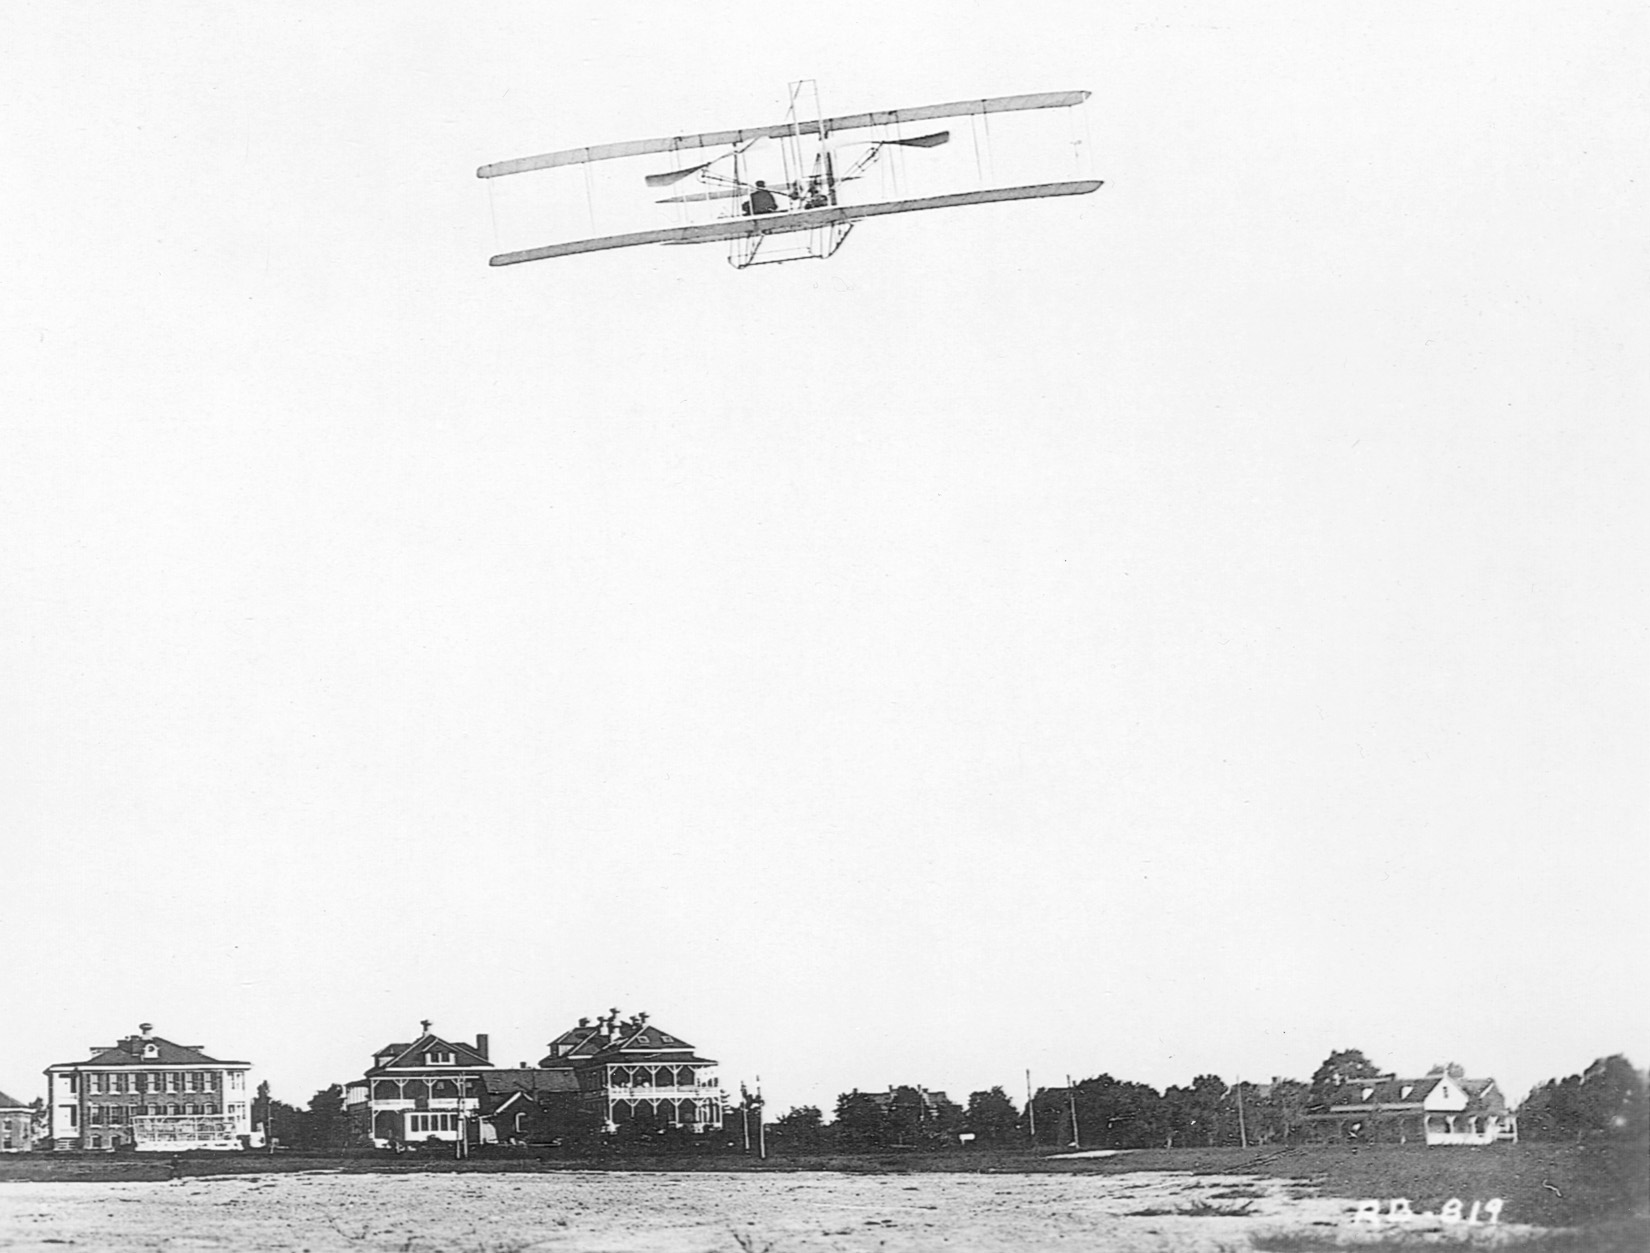 A Wright brothers airplane flying over Fort Myer, Virginia. Foulois was the first military man to fly with the Wright brothers. He saw the potential of air power immediately and dedicated his life and career to the air military arm. 